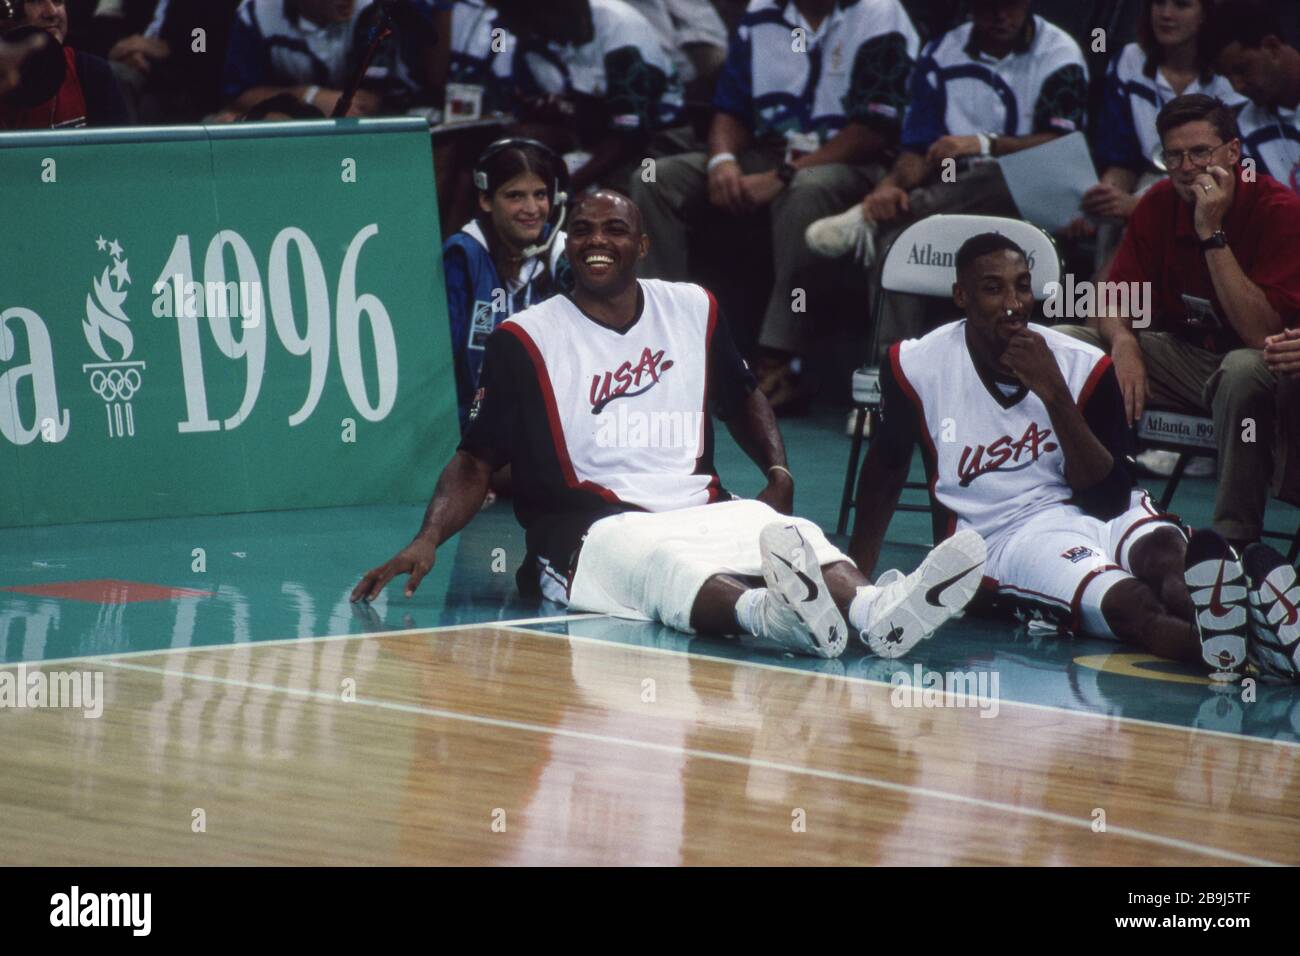 firo: 22.07.1996 Sport, basketball, men, men's Olympics, Summer Olympics Olympics, Atlanta, 96, 1996, old pictures, USA wins the gold medal USA - Argentina 96:68 Charles Wade Barkley, sits, on the ground, throw more than 20,000 points in the NBA, Hall of Fame | usage worldwide Stock Photo